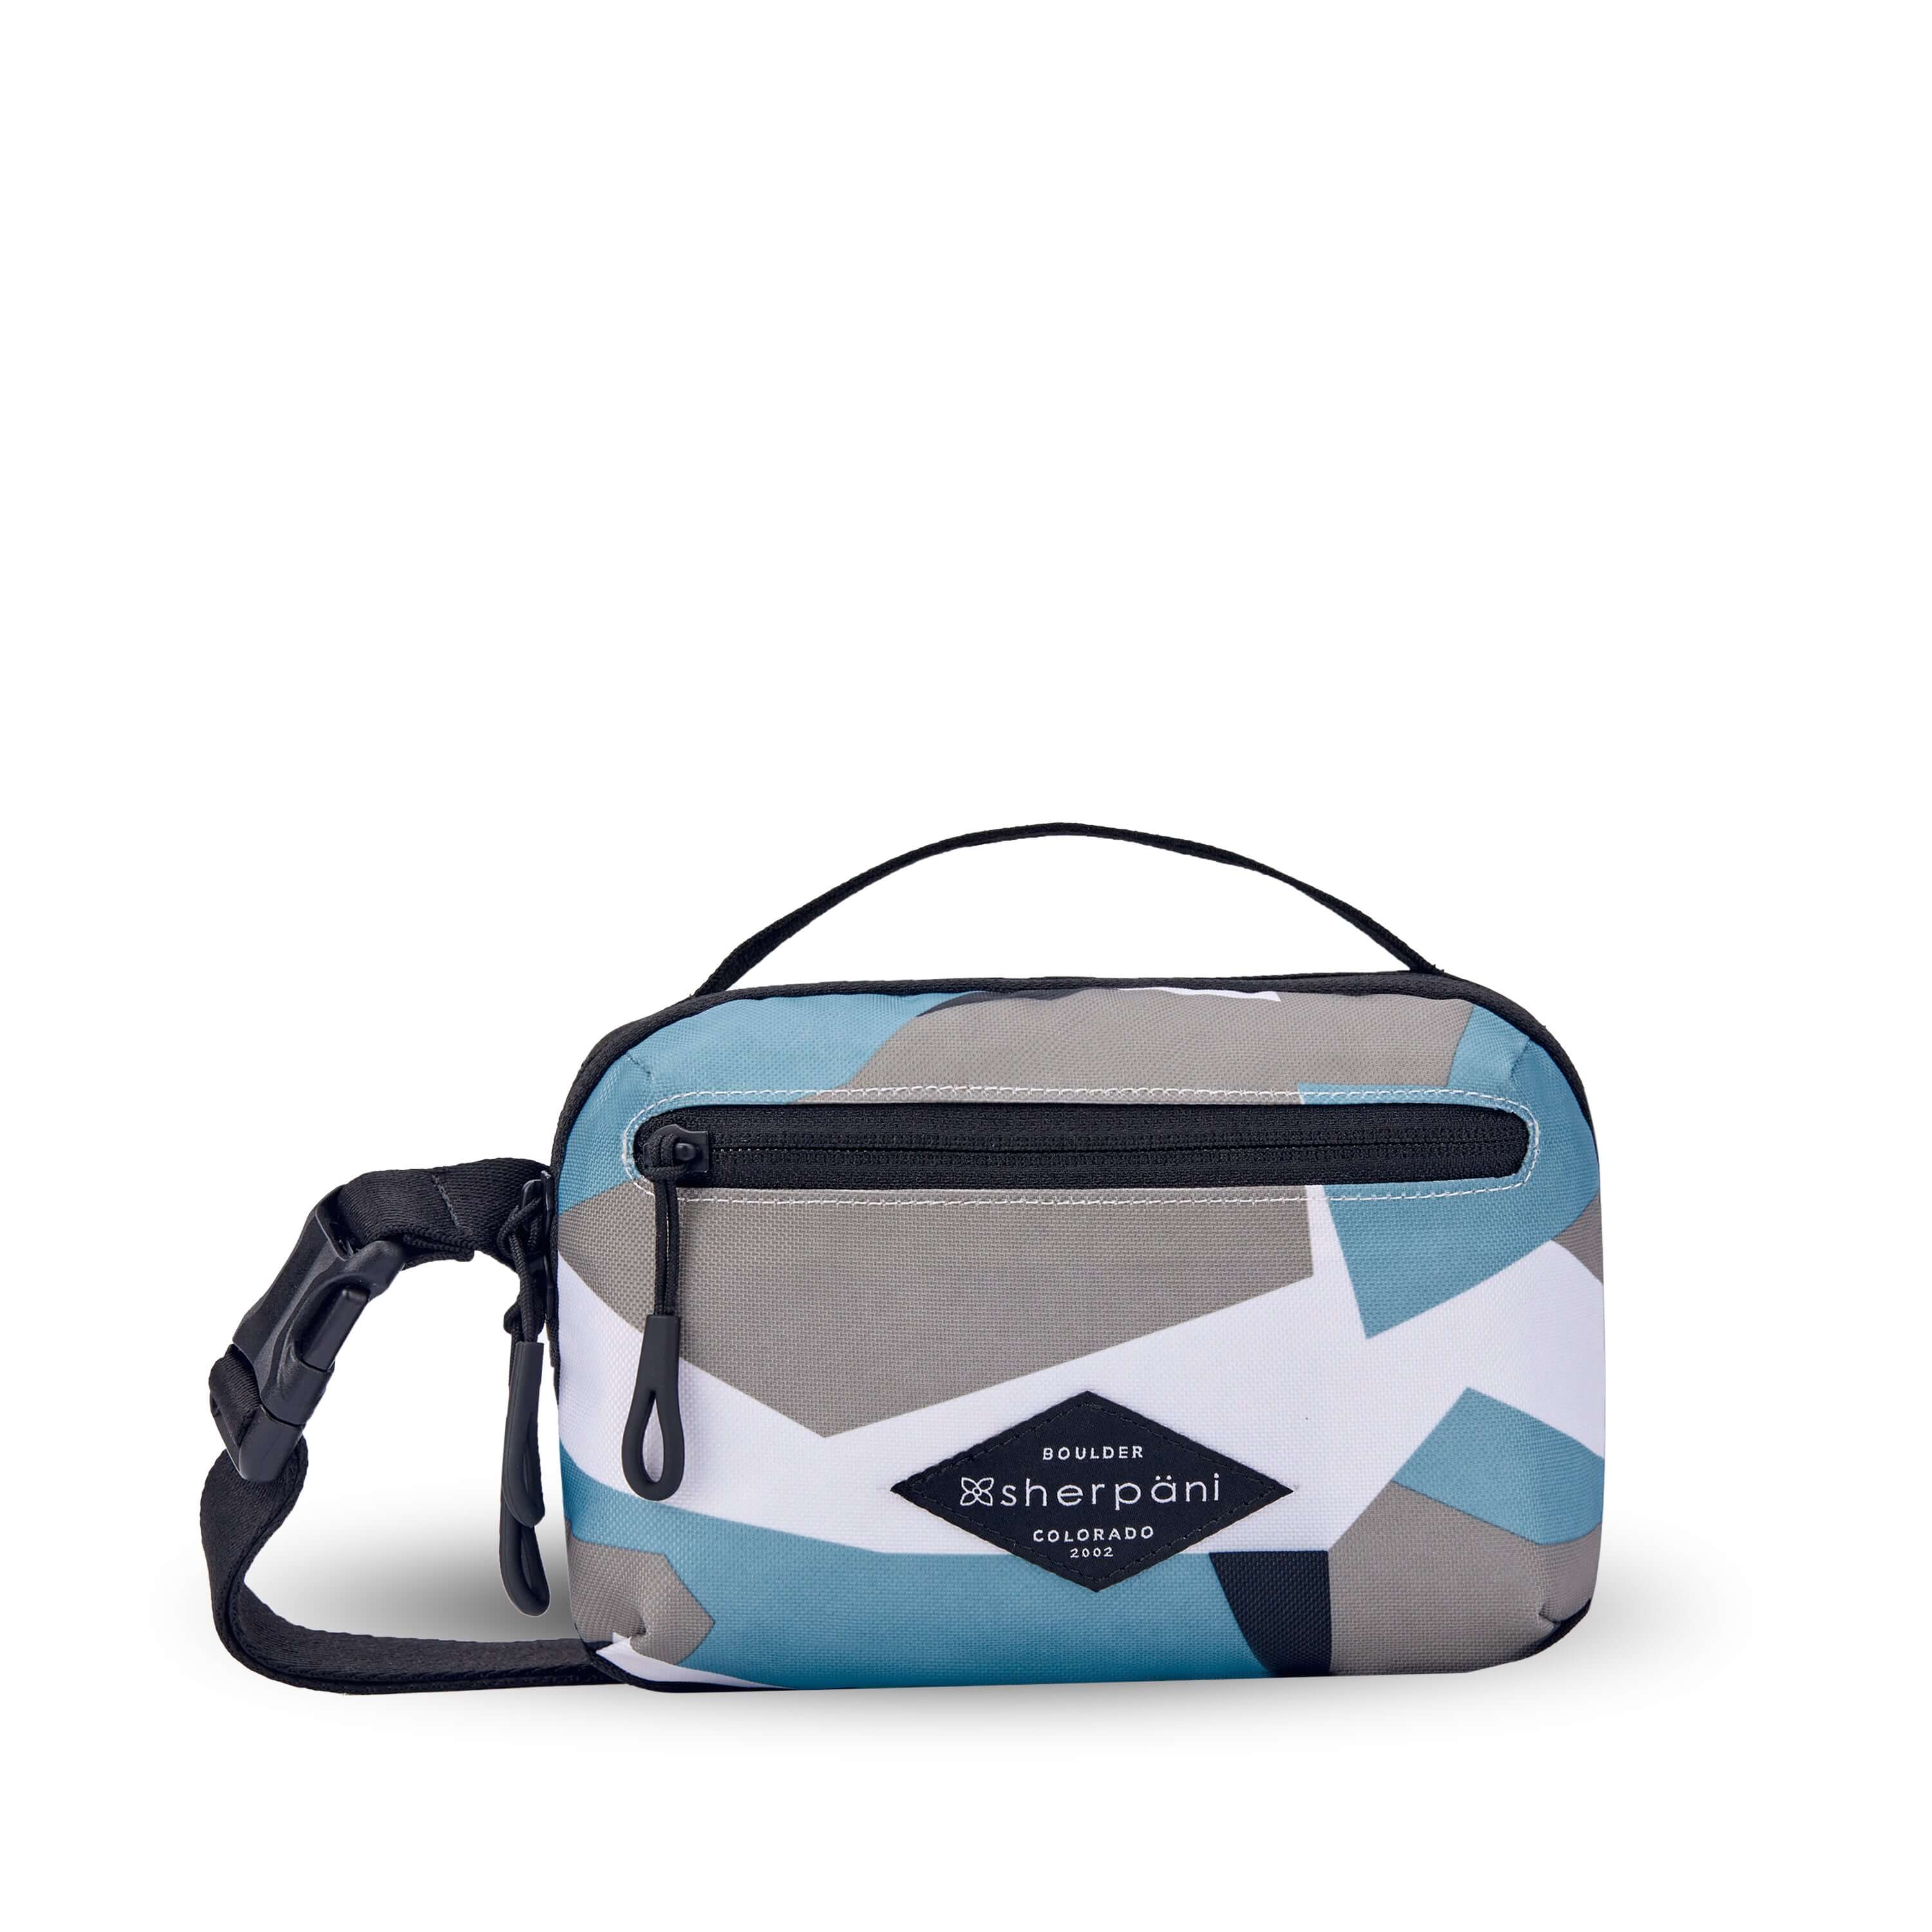 Flat front view of Sherpani’s fanny pack, the Hyk in Summe Camo. The bag is two toned, the front half is a camouflage pattern of light blue, white and gray, and the back half is black. There is an external zipper pocket on the front of the bag. Easy pull zippers are accented in black. The fanny pack features an adjustable strap with a buckle. 